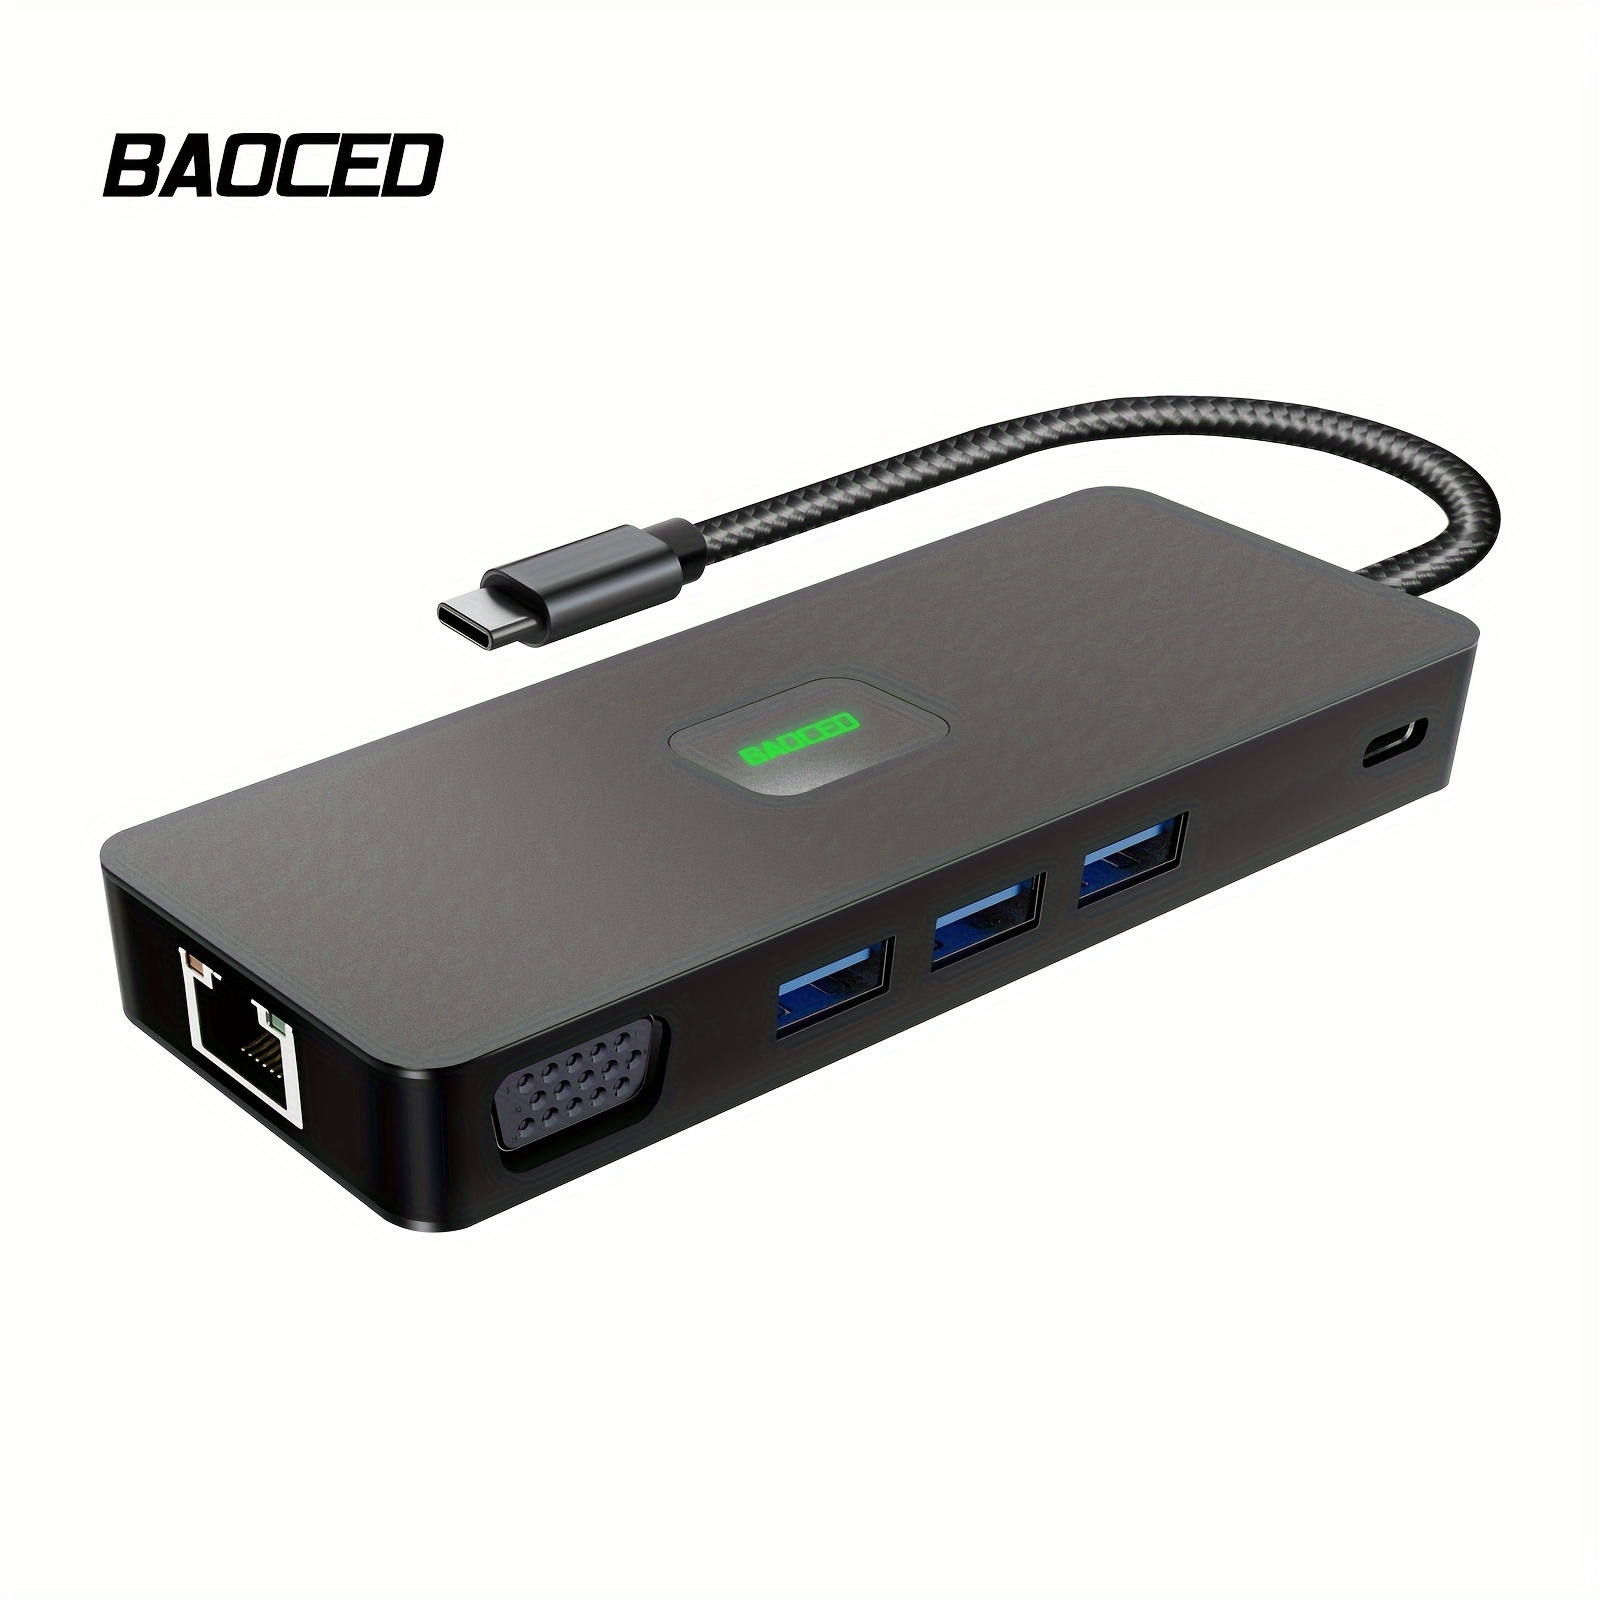 

Baoced 11 In 1 Usb C Docking Station 3 Monitors To 4k , Vga, Dp, Multiport Adapter To 3 * 10gbps Usb 3.2, 1000m Ethernet, Pd 100w, Sd/tf For Laptops And Phone